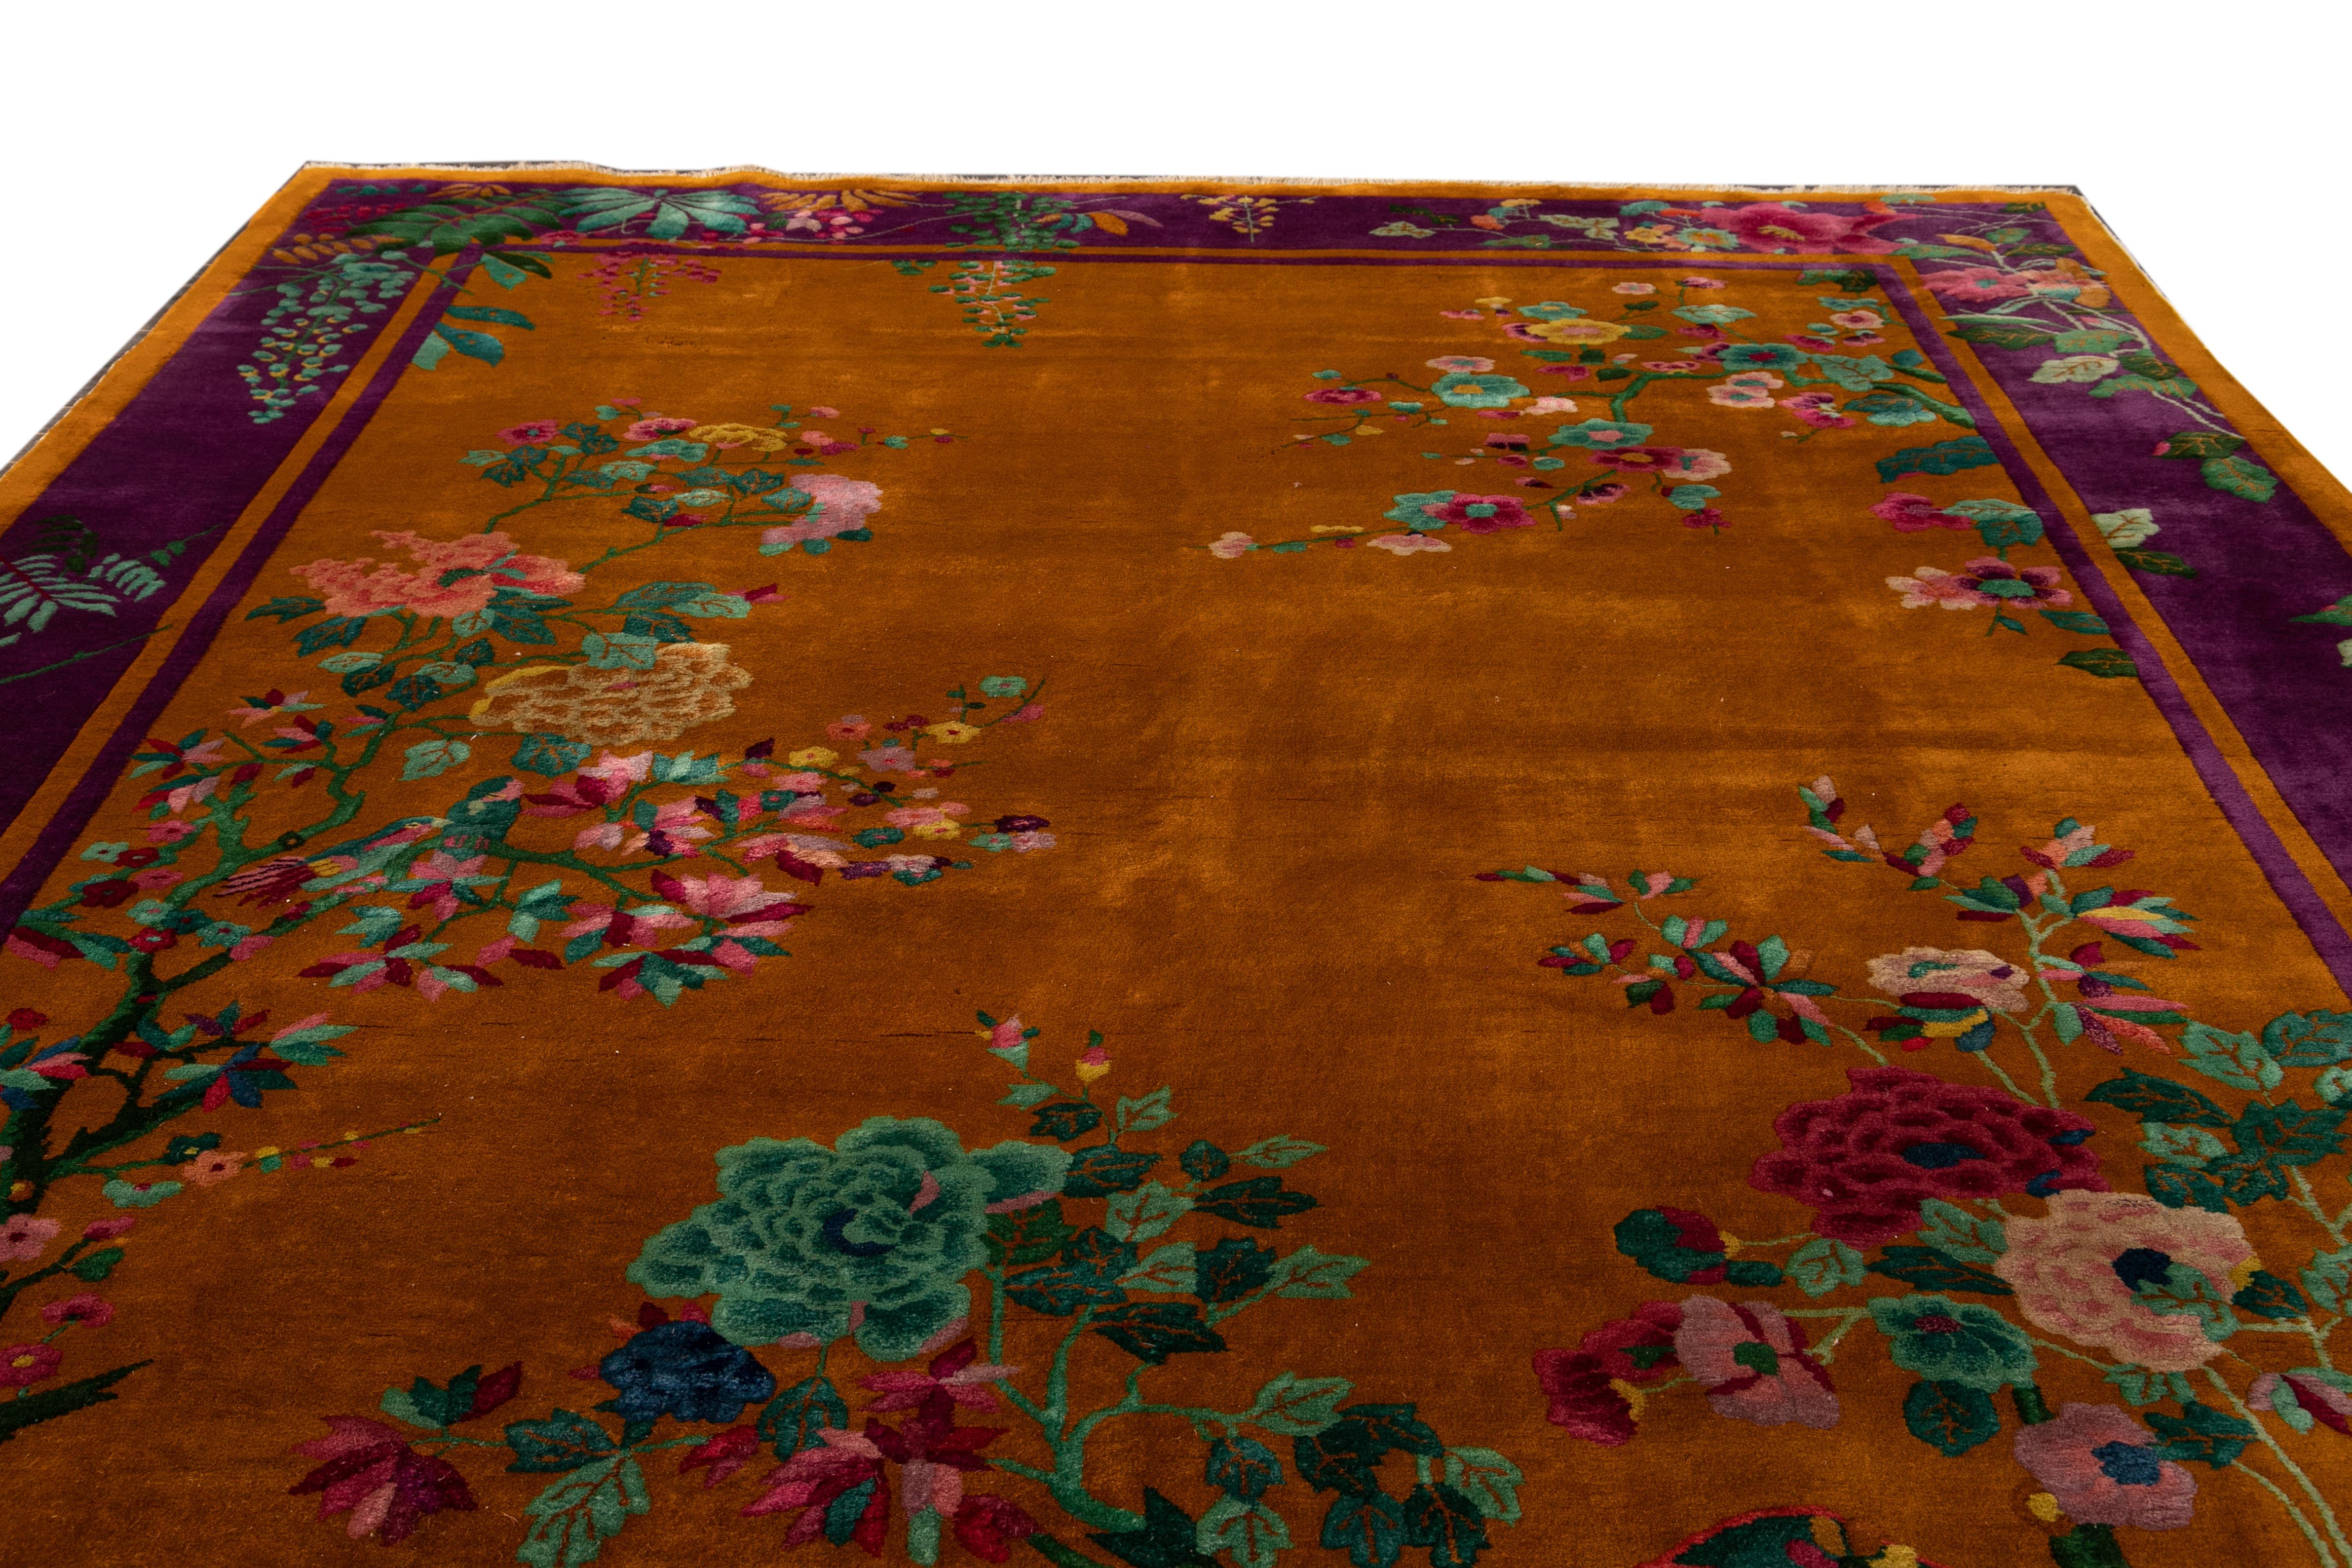 Antique Art Deco Orange and Purple Chinese Handmade Floral Wool Rug 2